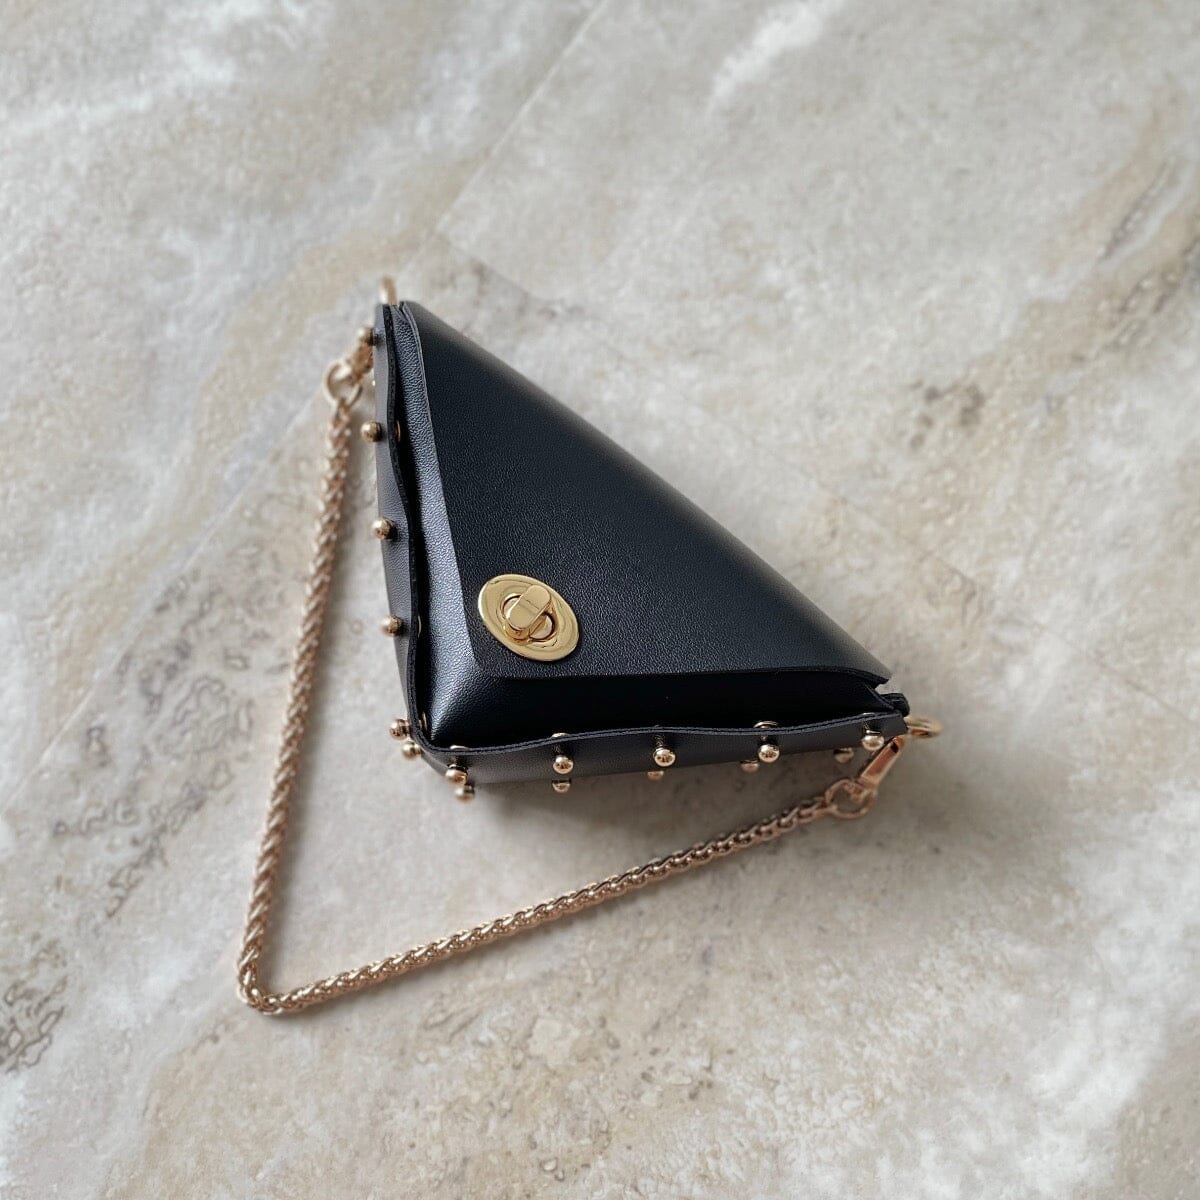 Petite triangle handcarry bag Bags LOVEFREYA Black Gold 